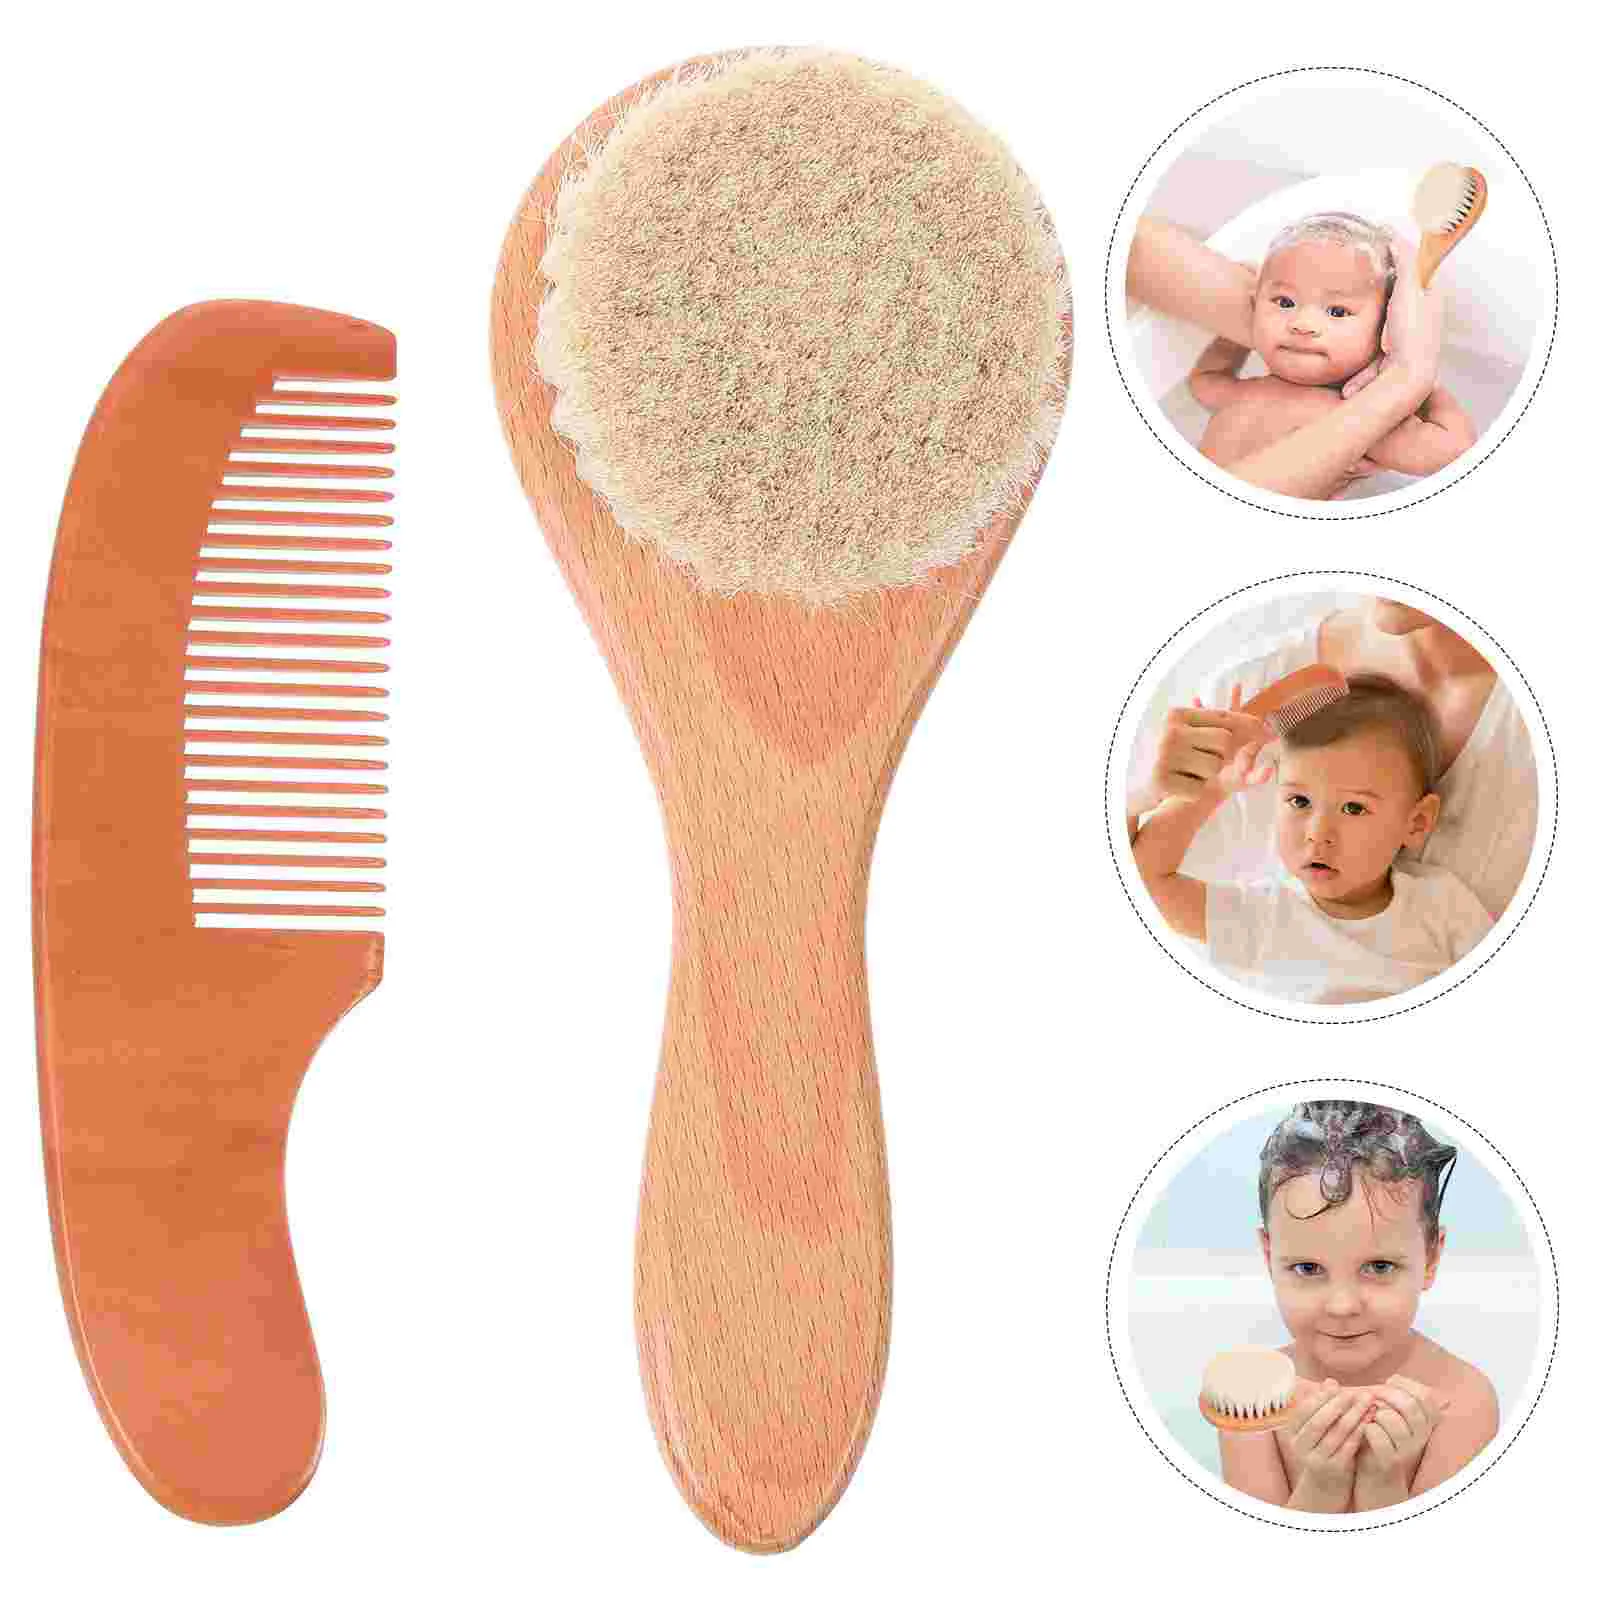 

Baby Scalp Brush Newborn Hair Comb Care Christening Gifts Infant Wool Wooden Masajeador Cuero Cabelludo